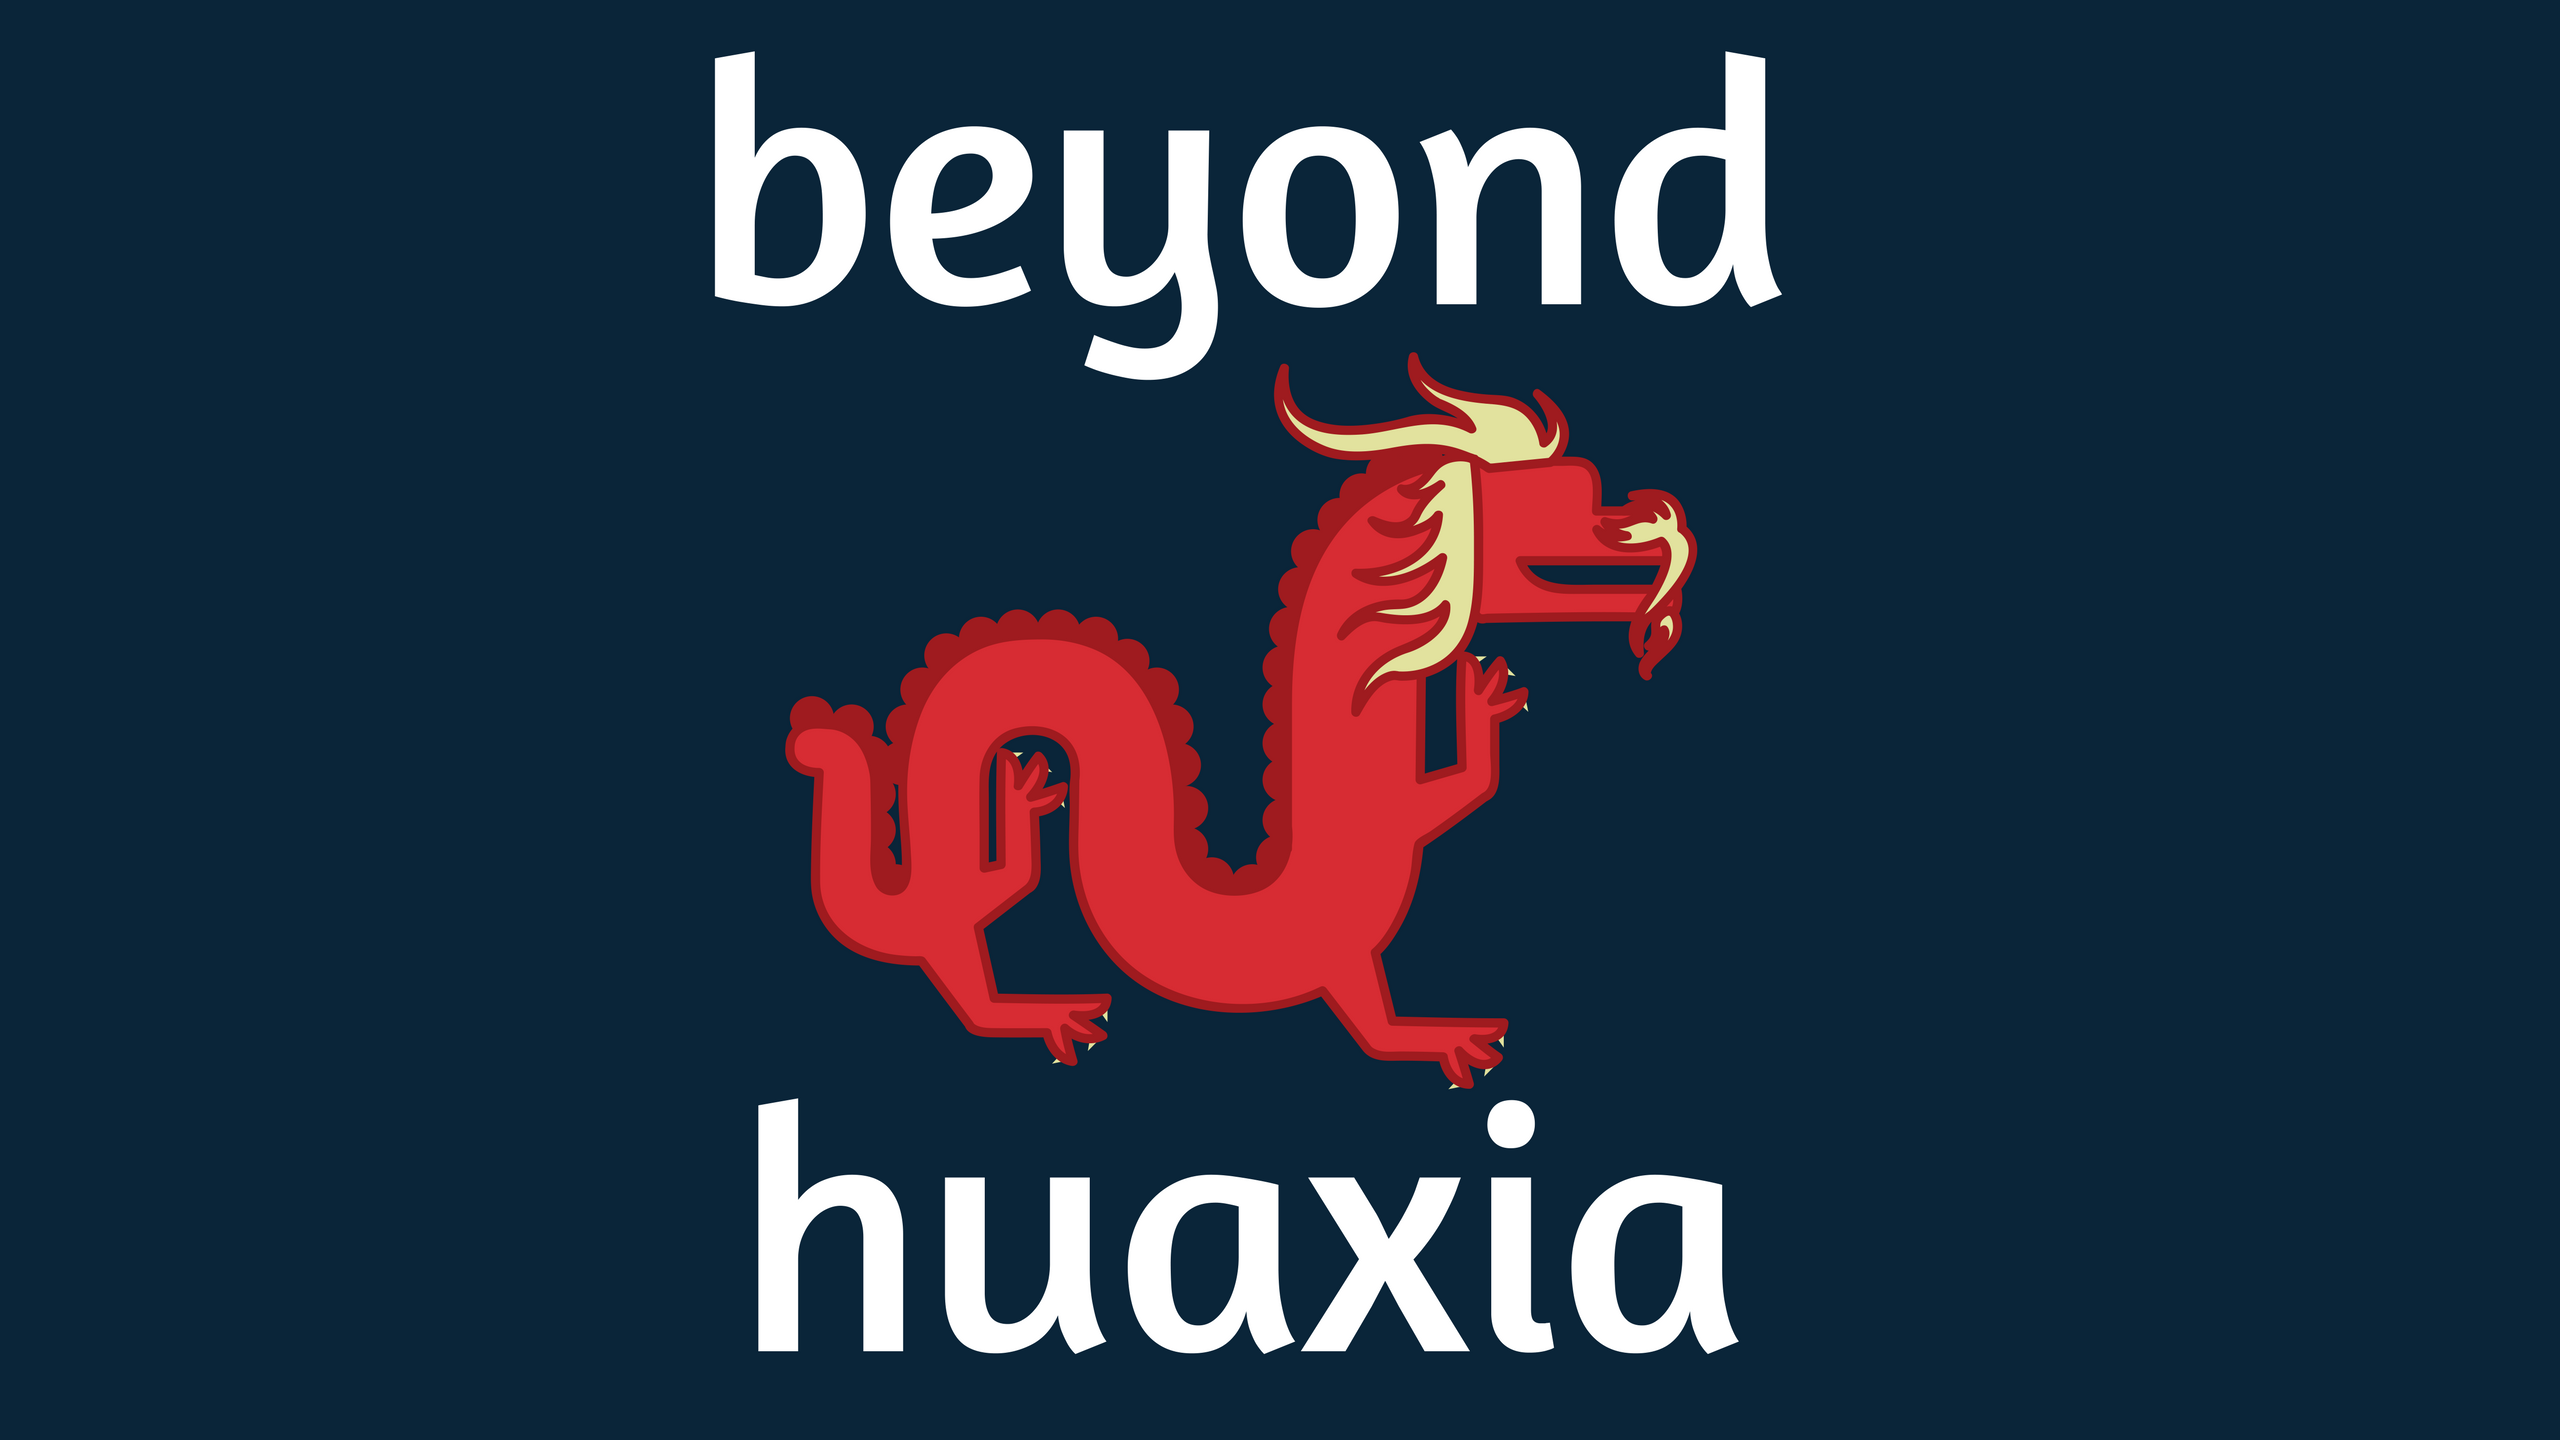 Beyond Huaxia: A College History of China and Japan